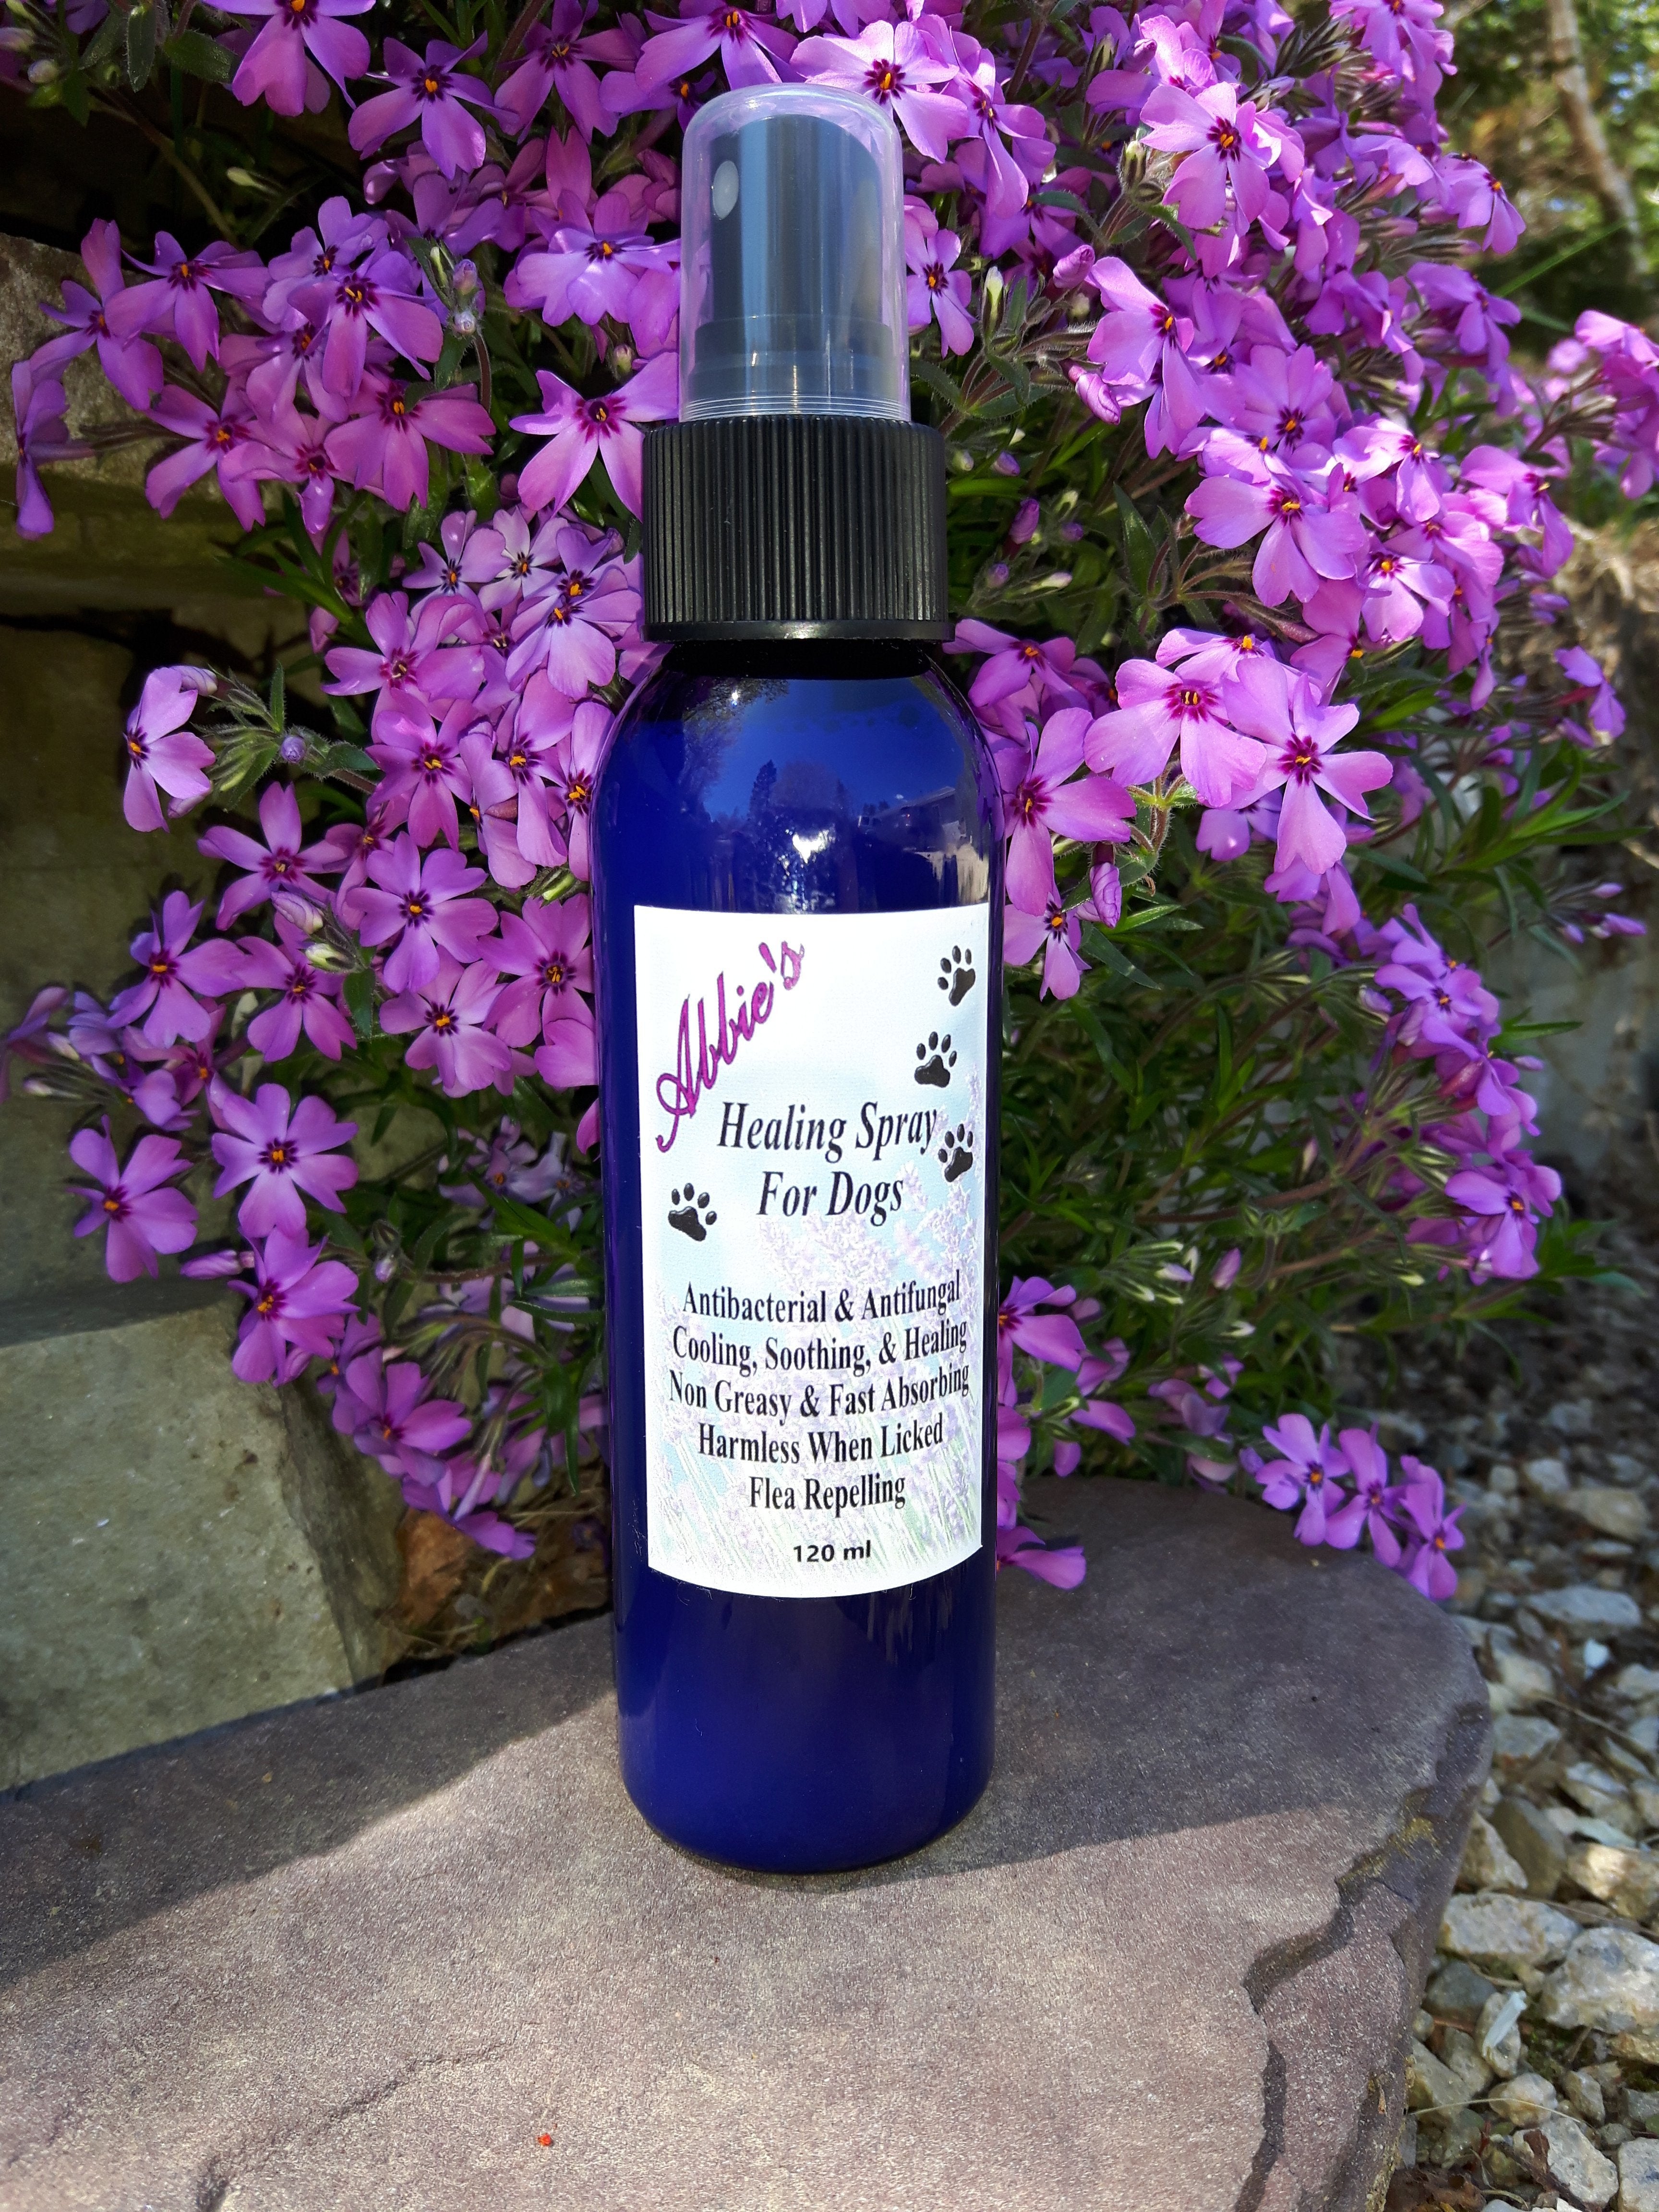 Healing Spray for Dogs 120ml - Abbie's Natural Skin Care Products